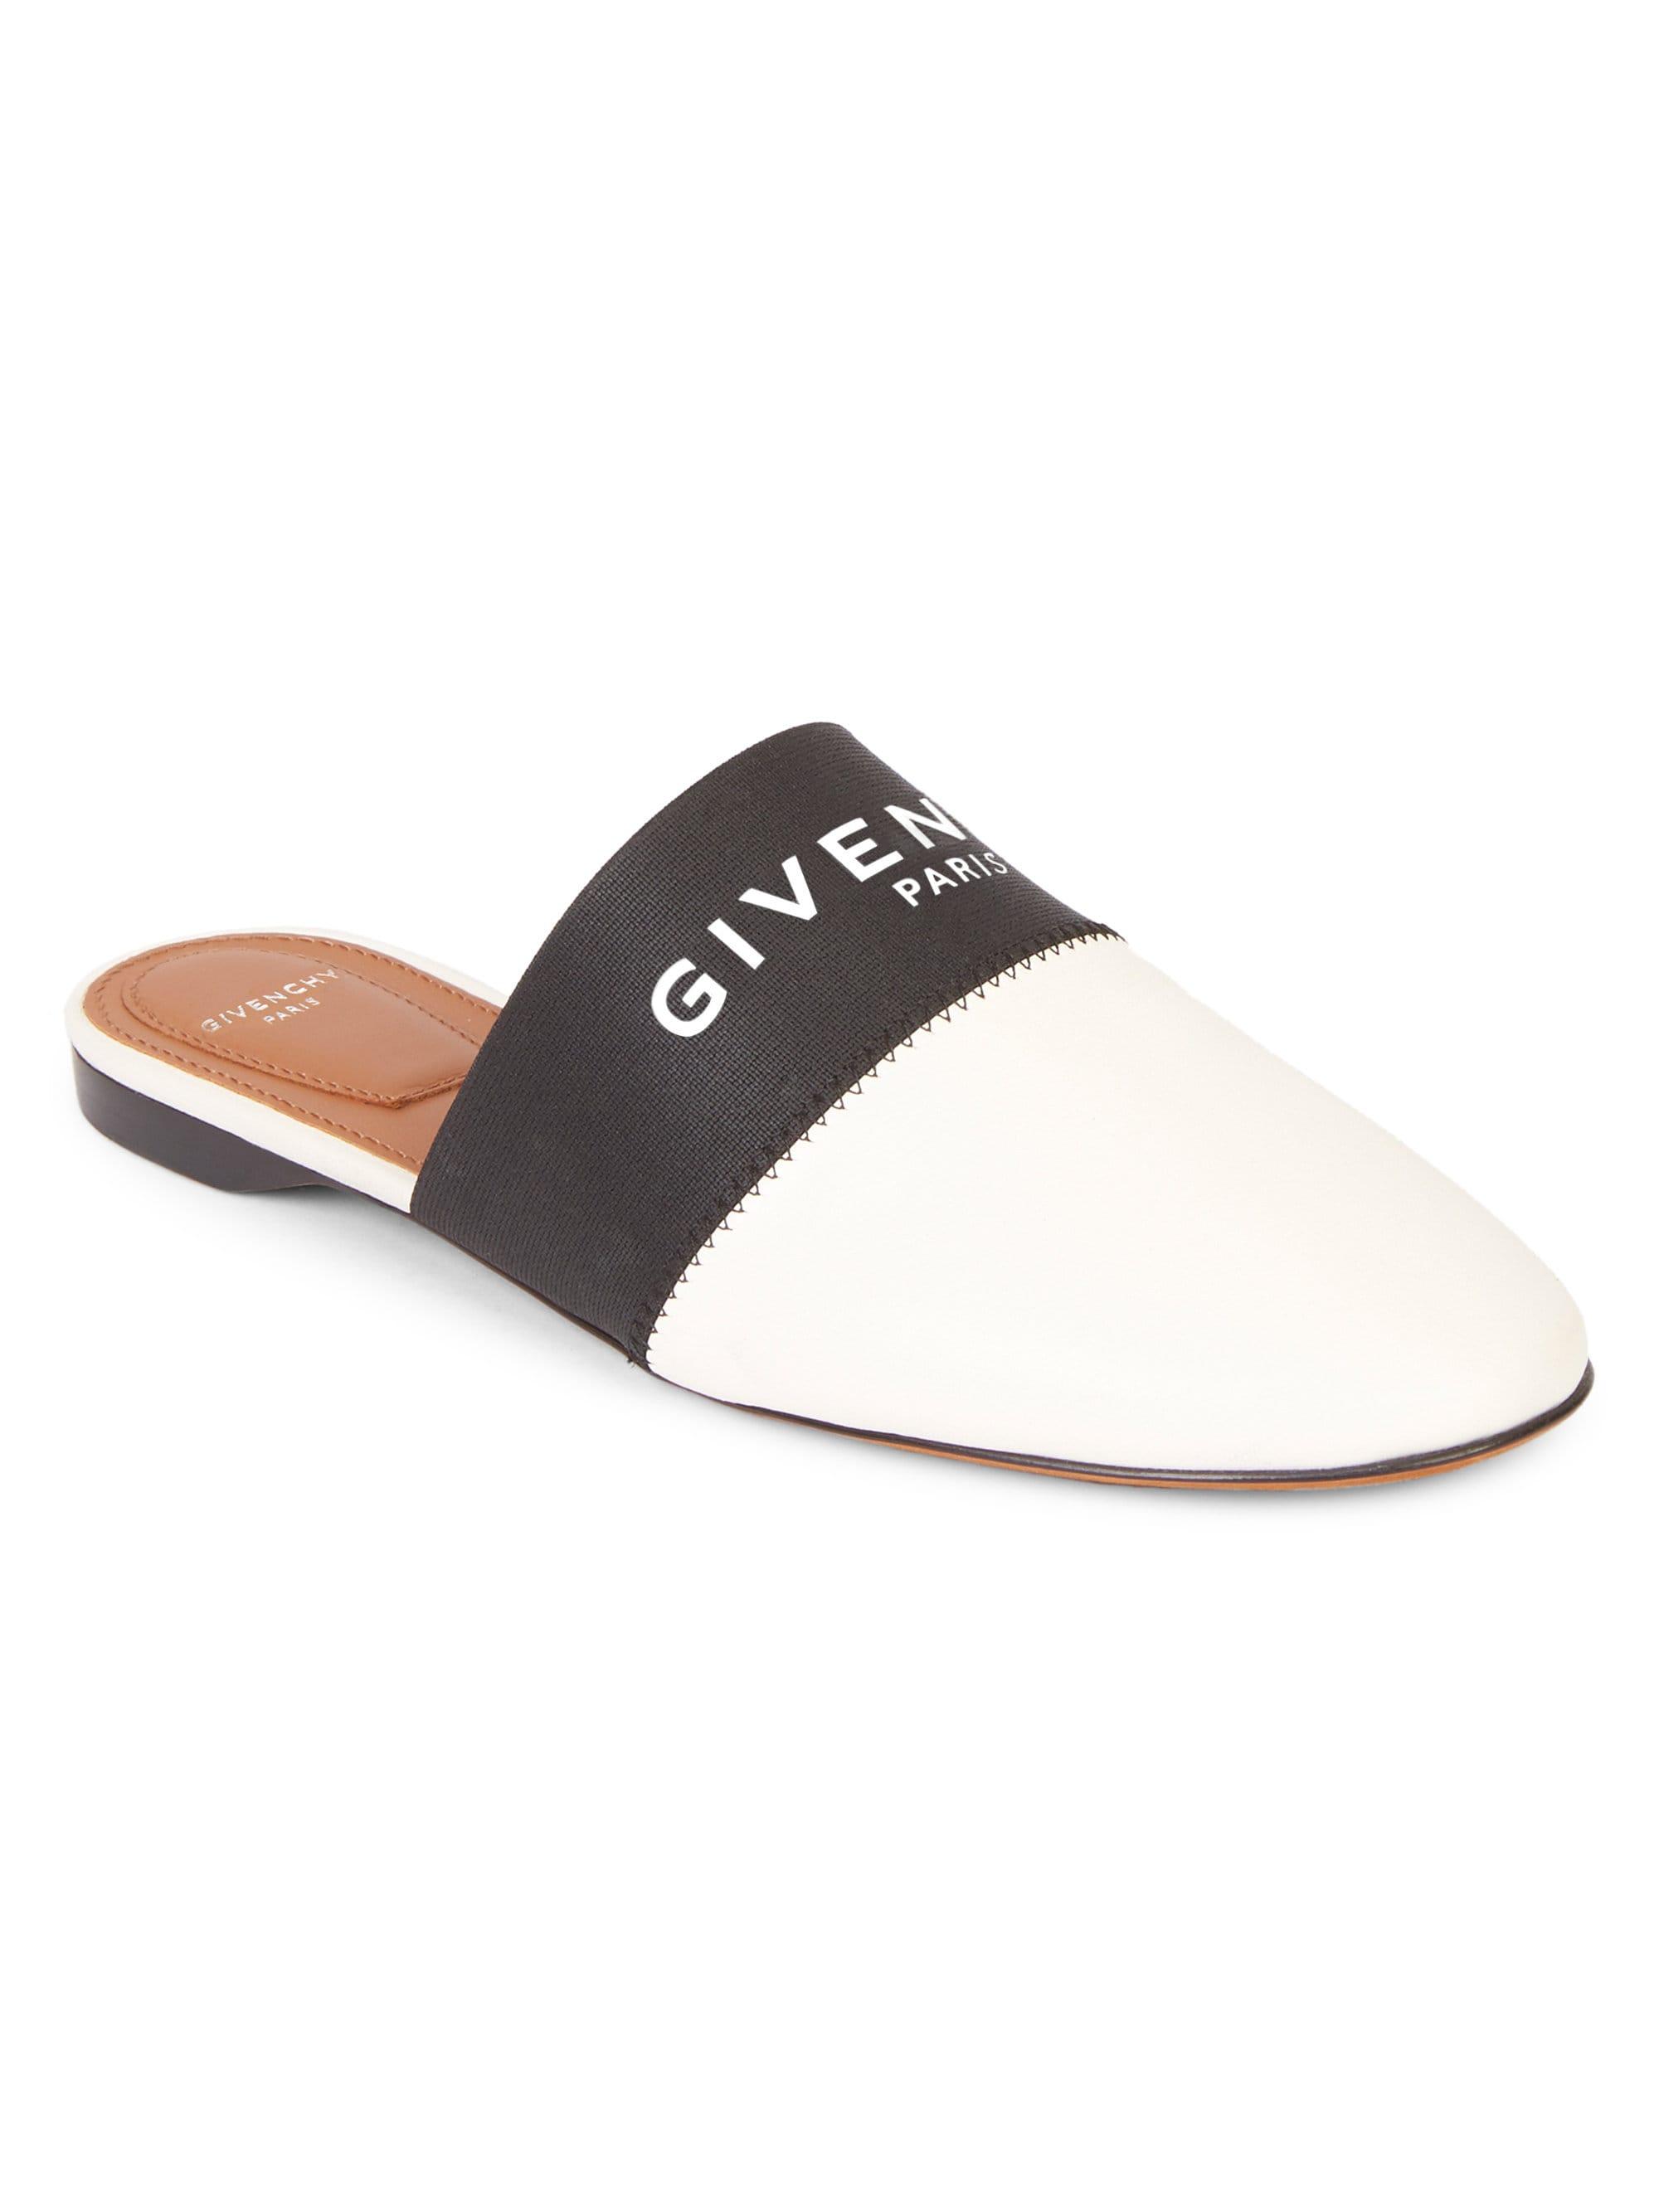 Givenchy Bedford Flat Leather Mules in Black Beige (Black) | Lyst